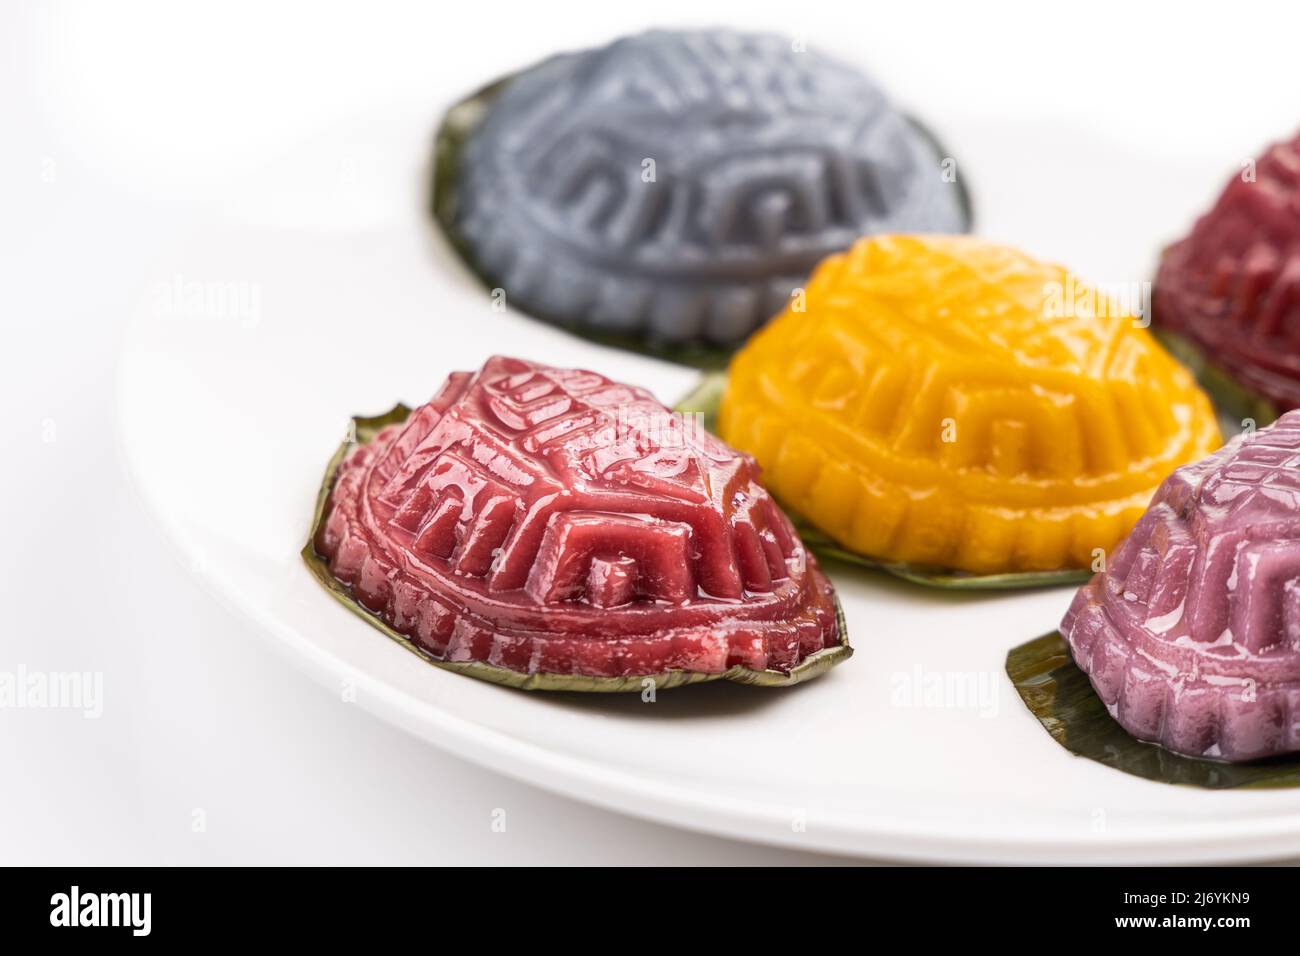 Nyonya angku kueh is traditional food prepared during festive celebration in Malaysia. Also known as red tortoise cake. Stock Photo